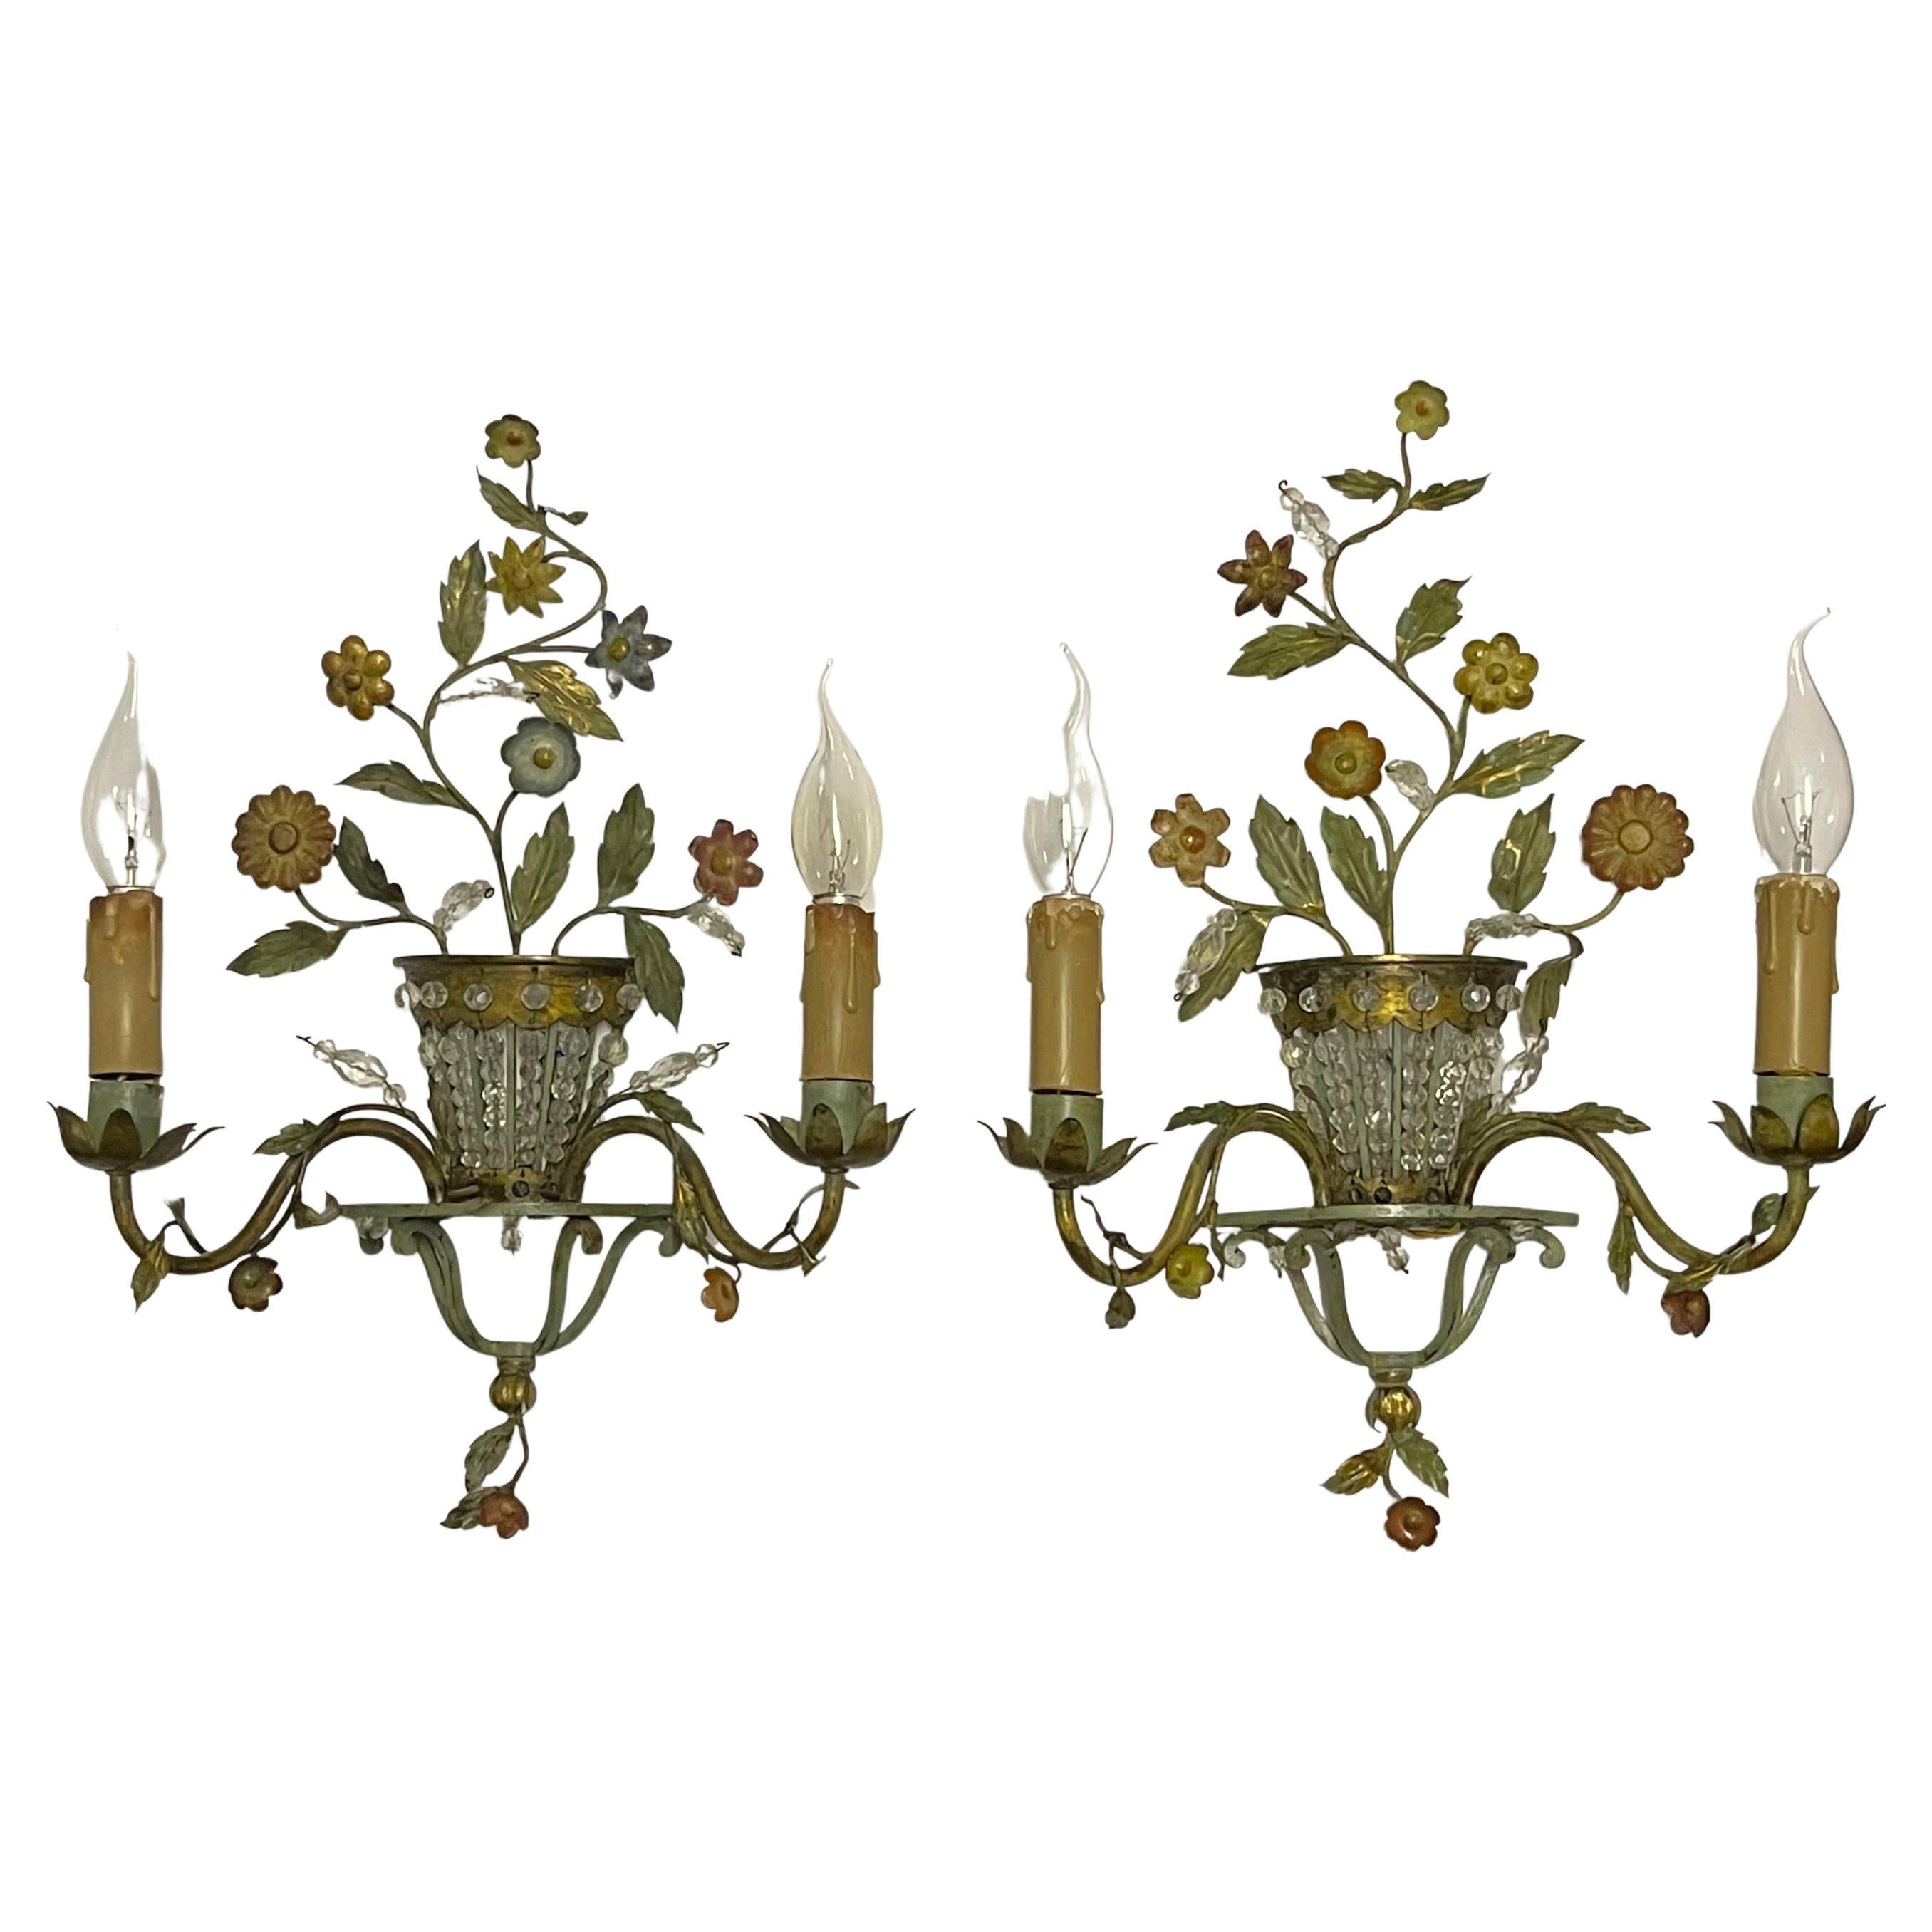 Pair of French Patinated Bronze Flower and Leaves Wall Sconces, circa 1920s For Sale